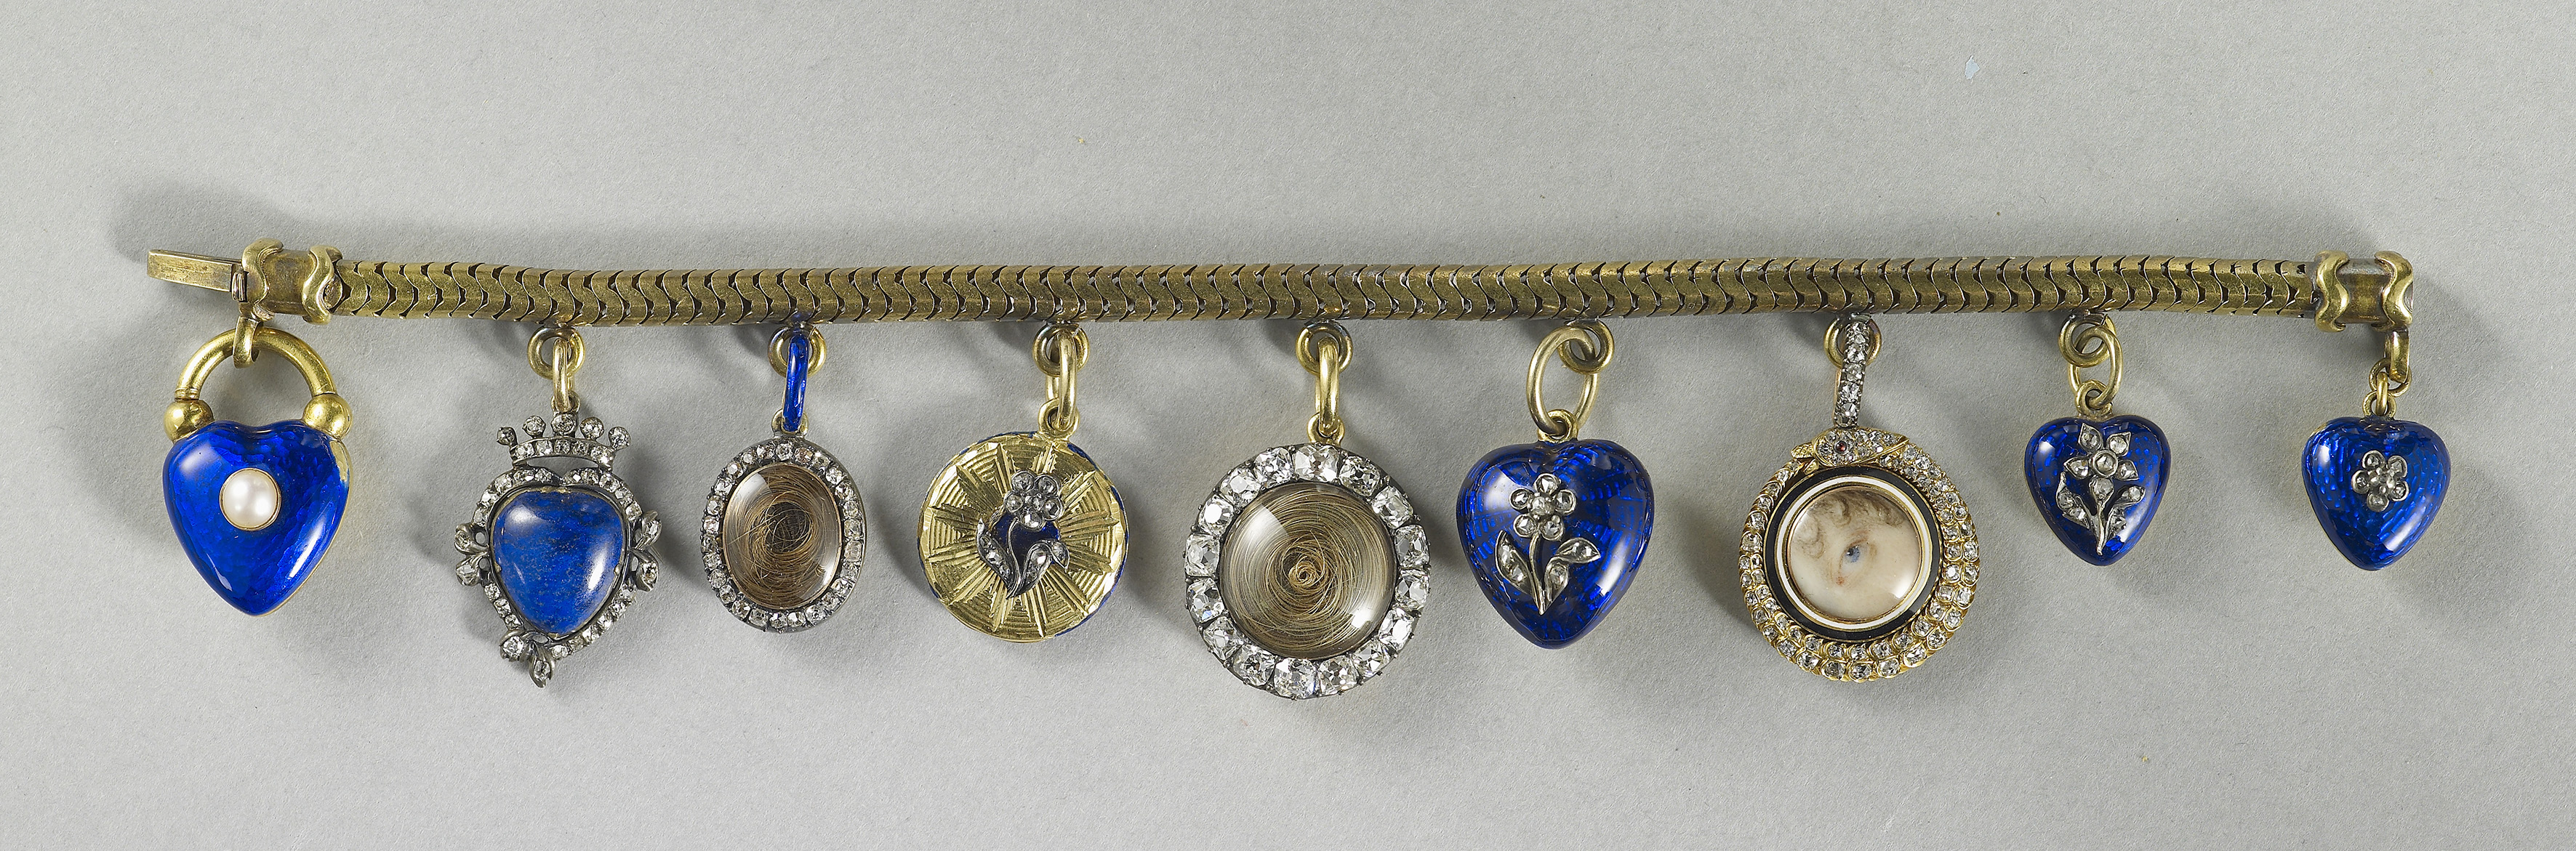 Bracelet with nine lockets, one with a miniature of Princess Charlotte's left eye